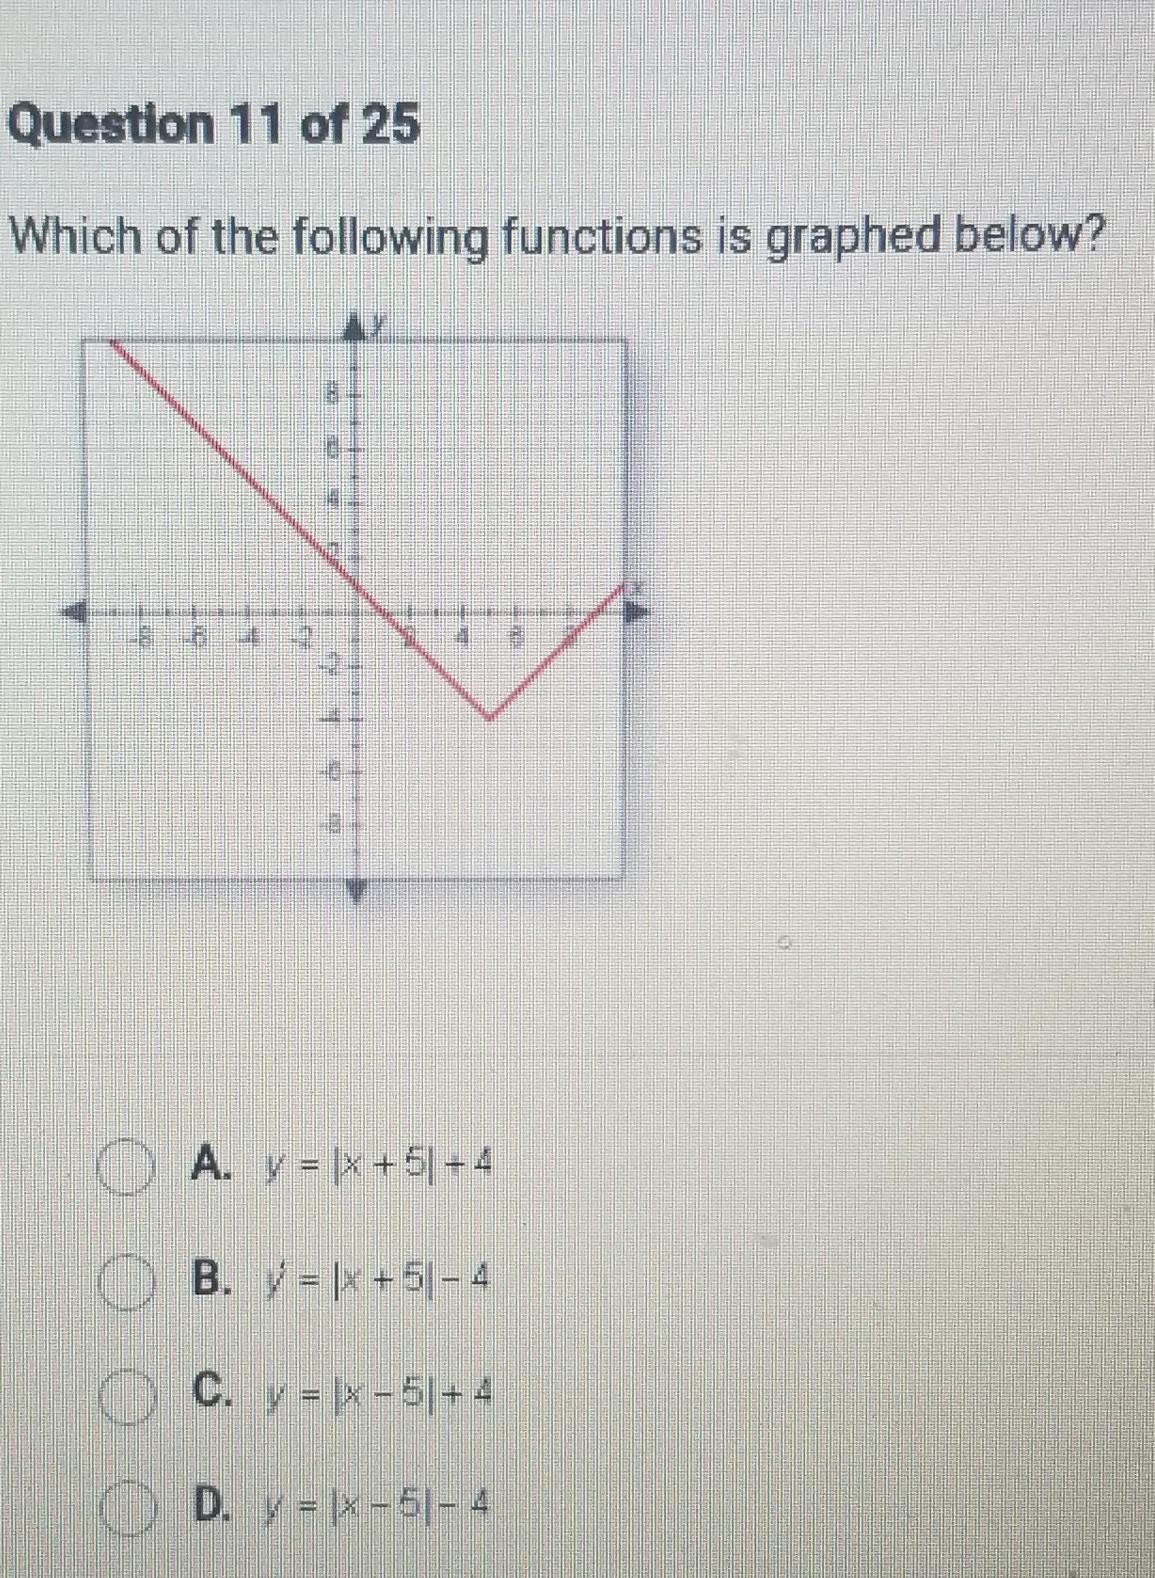 Question 11 Of 25 Which Of The Following Functions Is Graphed Below? A. Y = X +51 + 4 B. V = X + 51-4